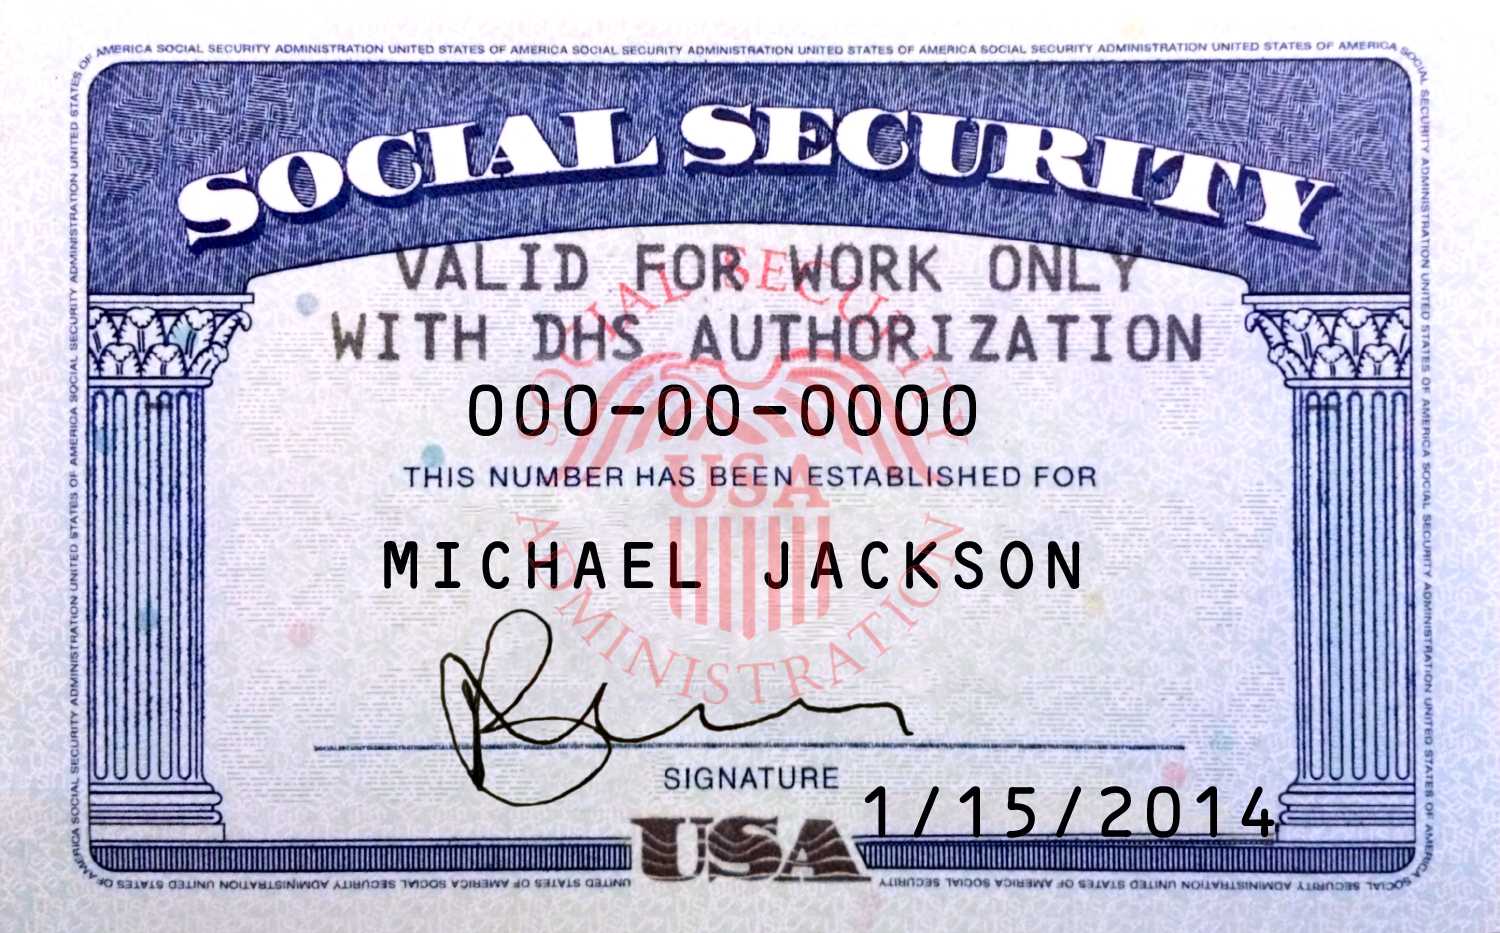 61 [Pdf] Social Security Number 765 Generator Printable Hd With Social Security Card Template Pdf